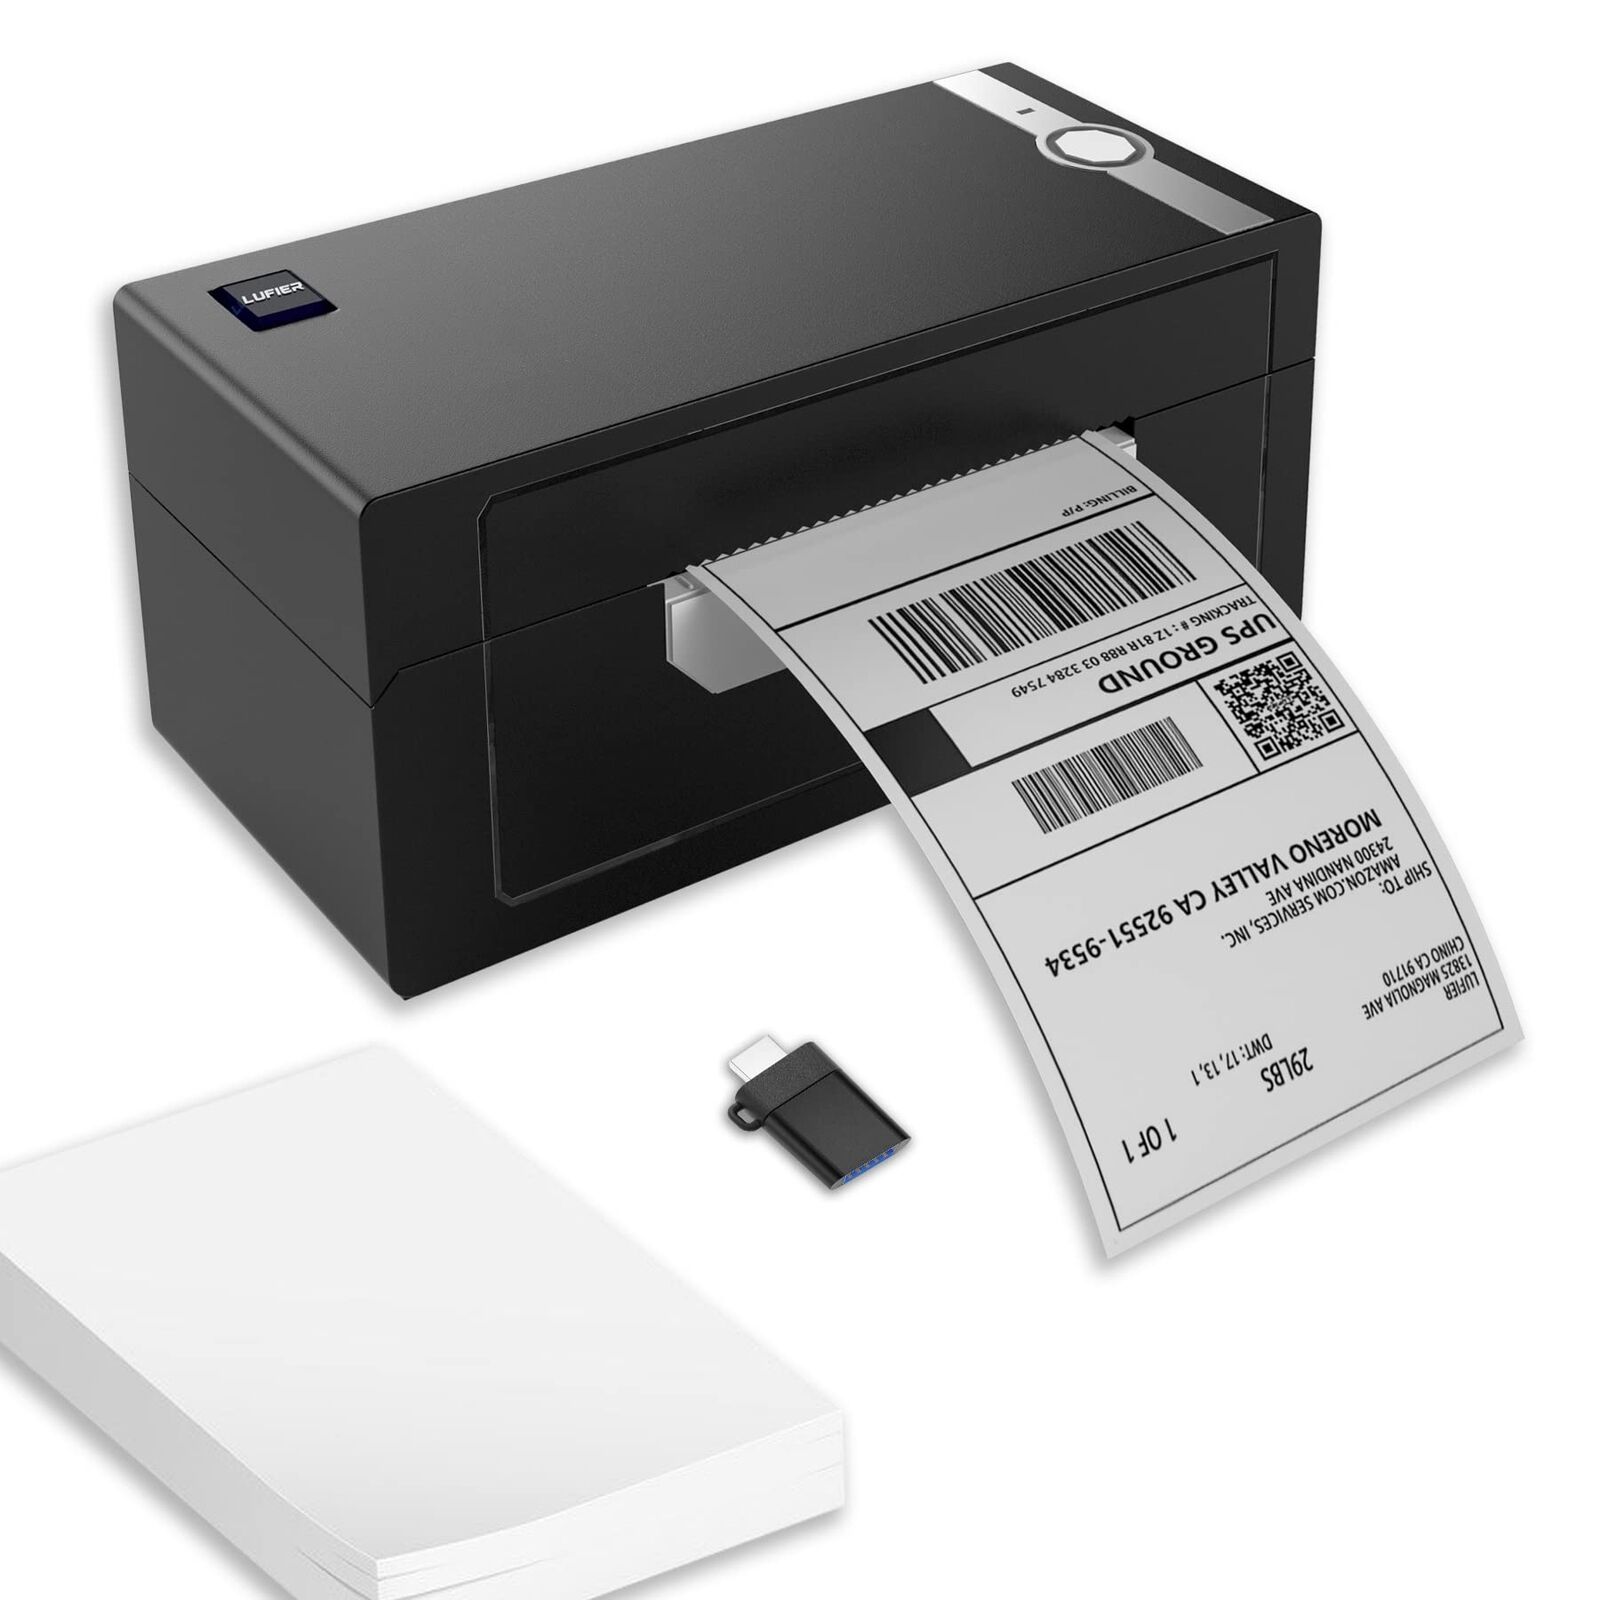 LUFIER 4x6 Label Printer - Commercial Grade Thermal Label Printer for Shippin...